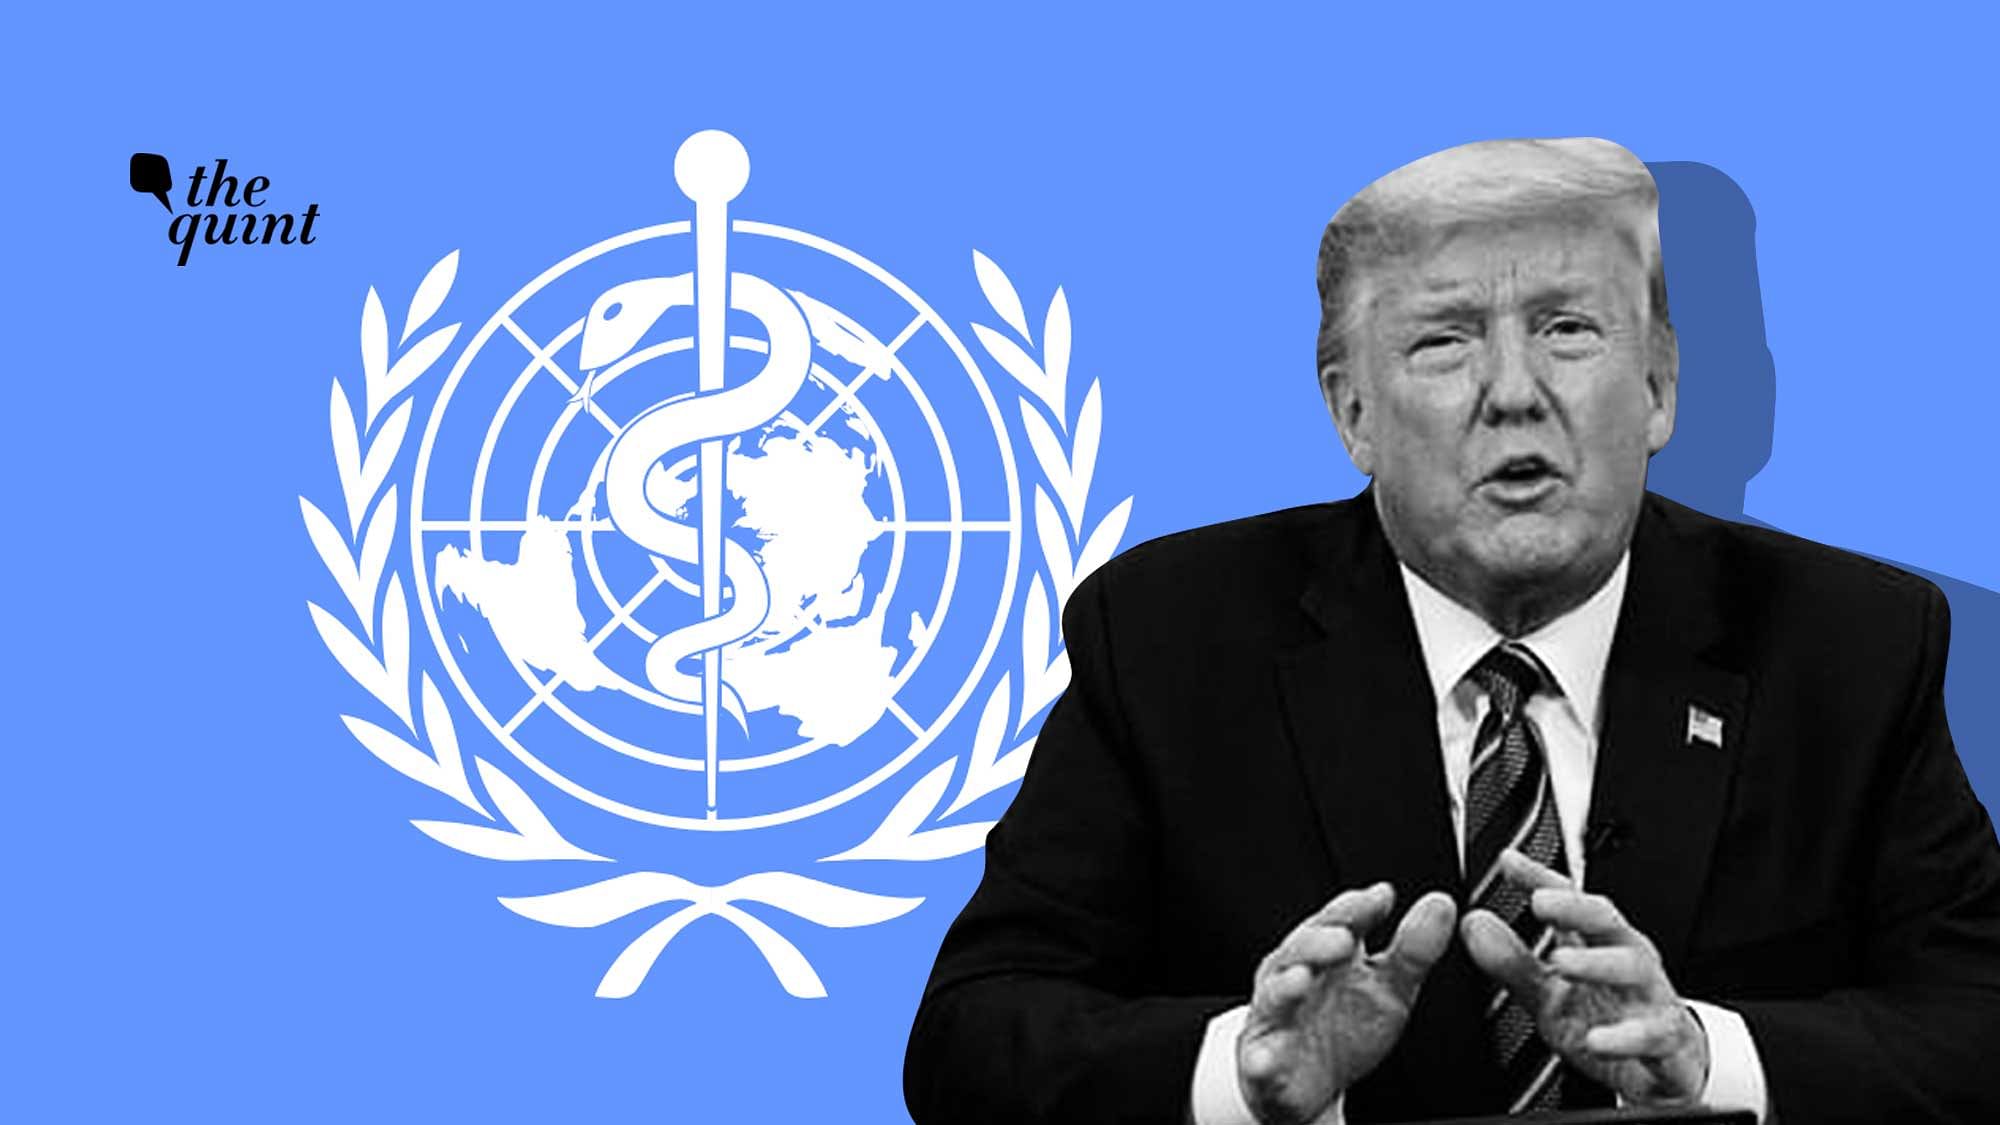 US President Donald Trump has accused the WHO of mishandling the initial spread of COVID-19 in China, and of being in control of the country.